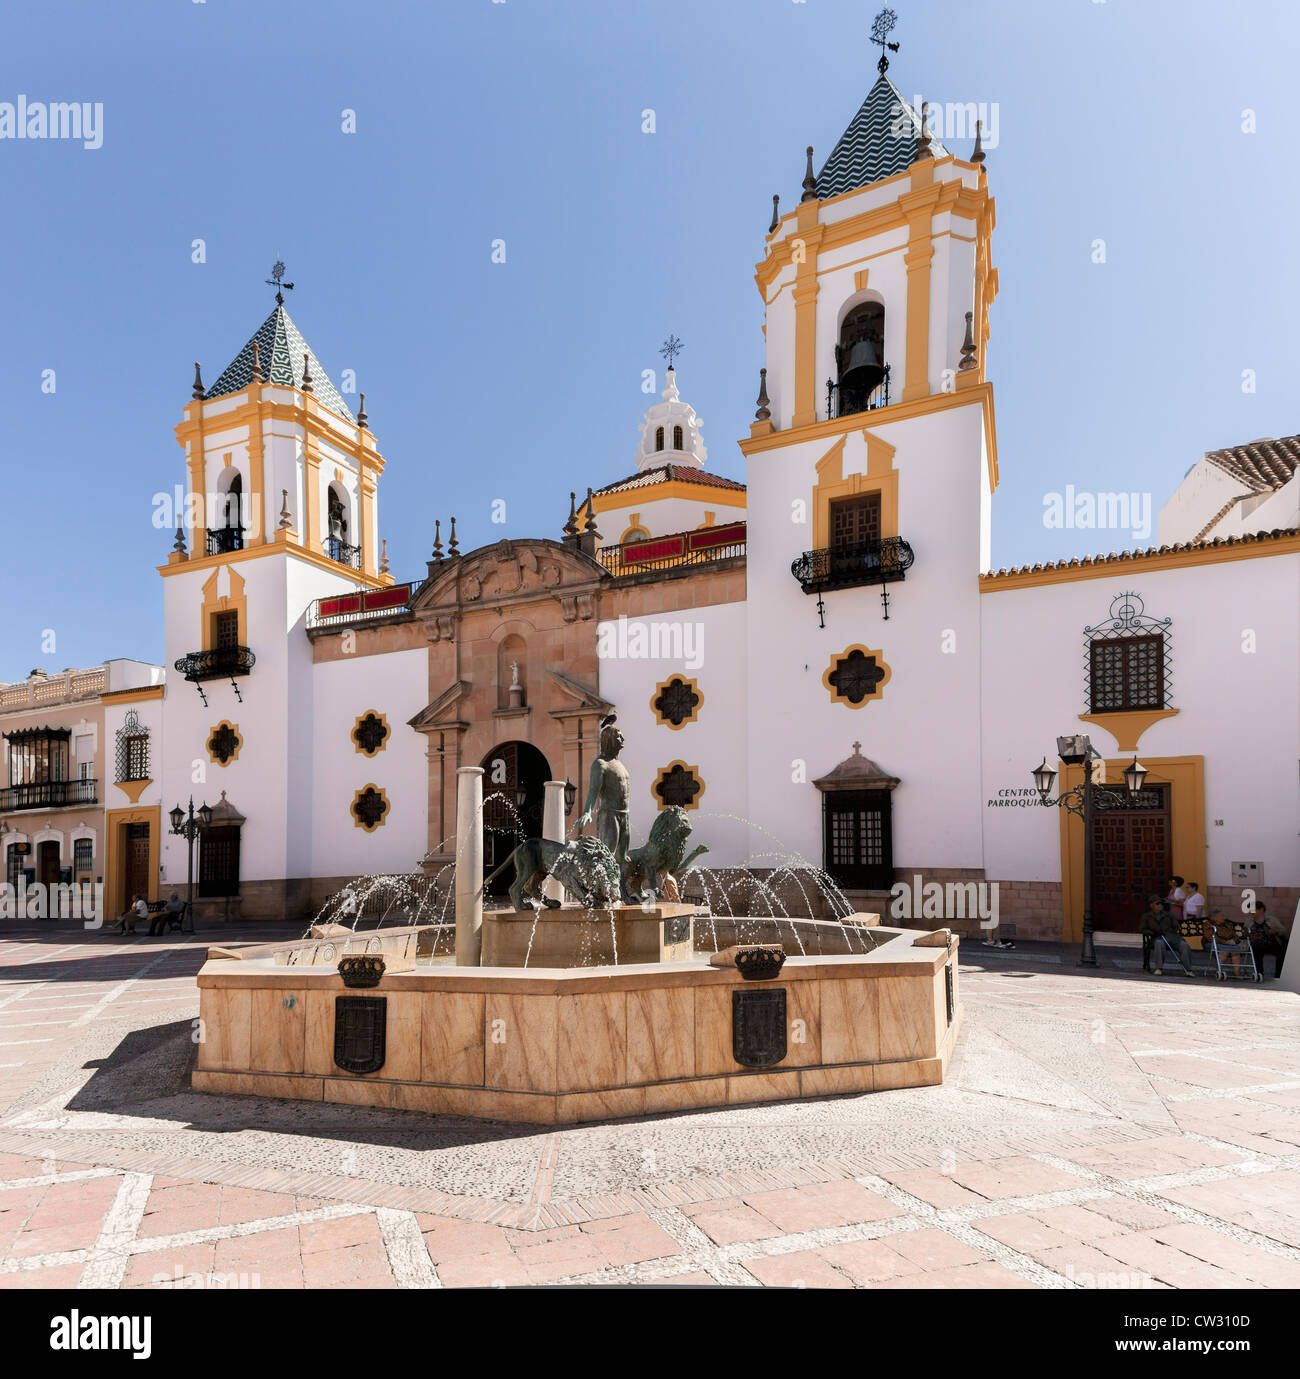 Ronda, Andalusia, Spain, Europe. Plaza del Socorro with imposing Church building and fountain. Stock Photo